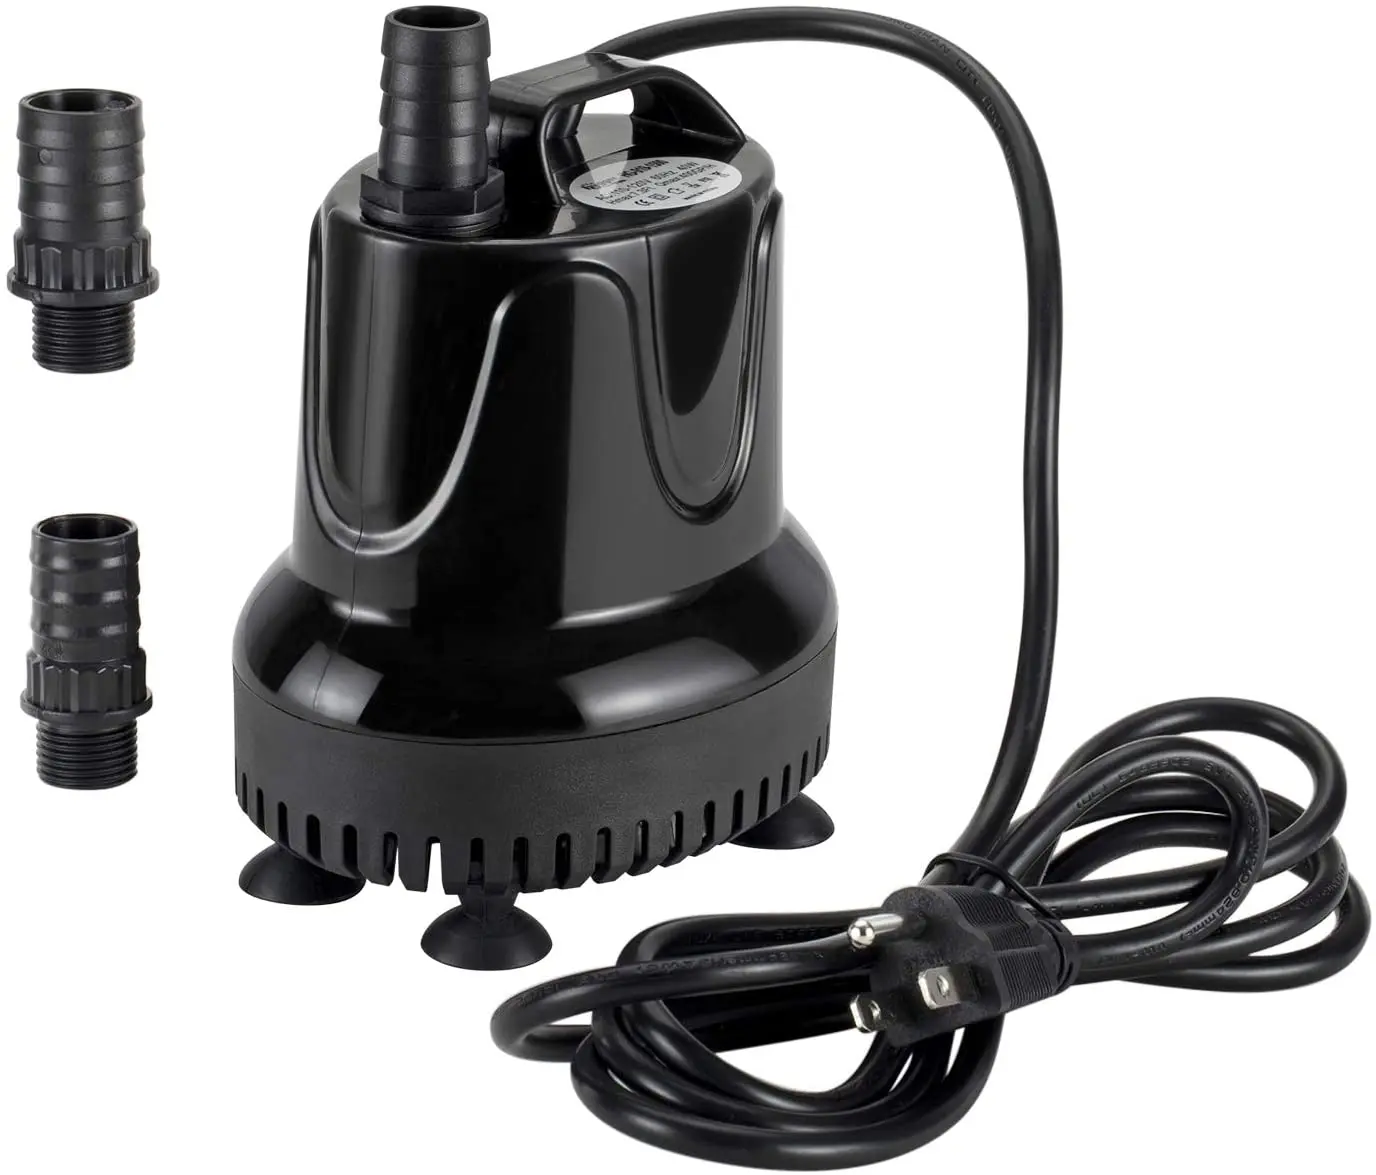 Inline Submersible Fish Tank Pump for Waterfall Fountain with Adaptors 215-1060 GPH Hygger Quiet Aquarium Water Pump for Water Removal Change Cleaning 